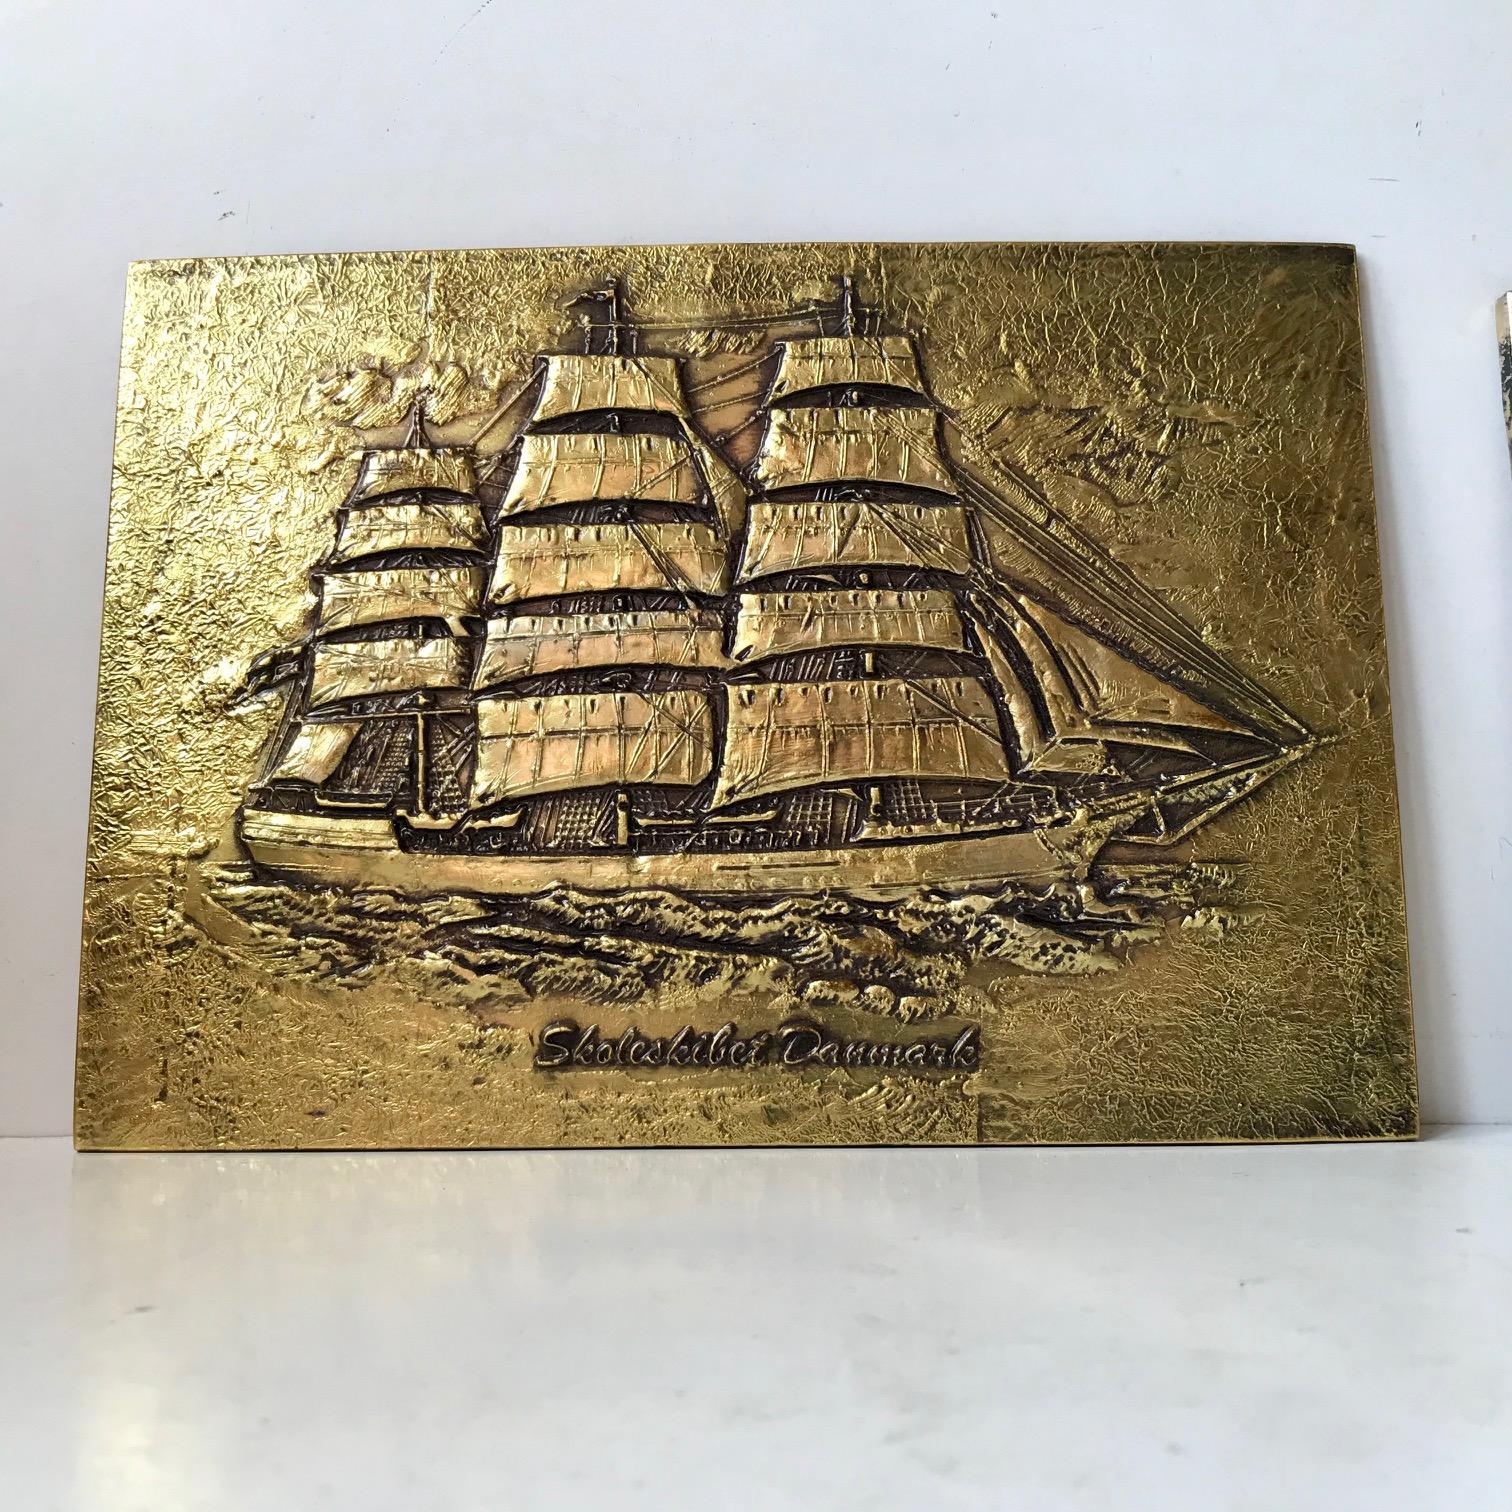 Rare decorative wall plaques for a nautical environment. A set of gilt wax/masonite plate images of the two historical Danish Full Rigged ships 'Skoleskibet Danmark' and 'Peder Most' built respectively in 1932 and 1944. Both of them made in Denmark